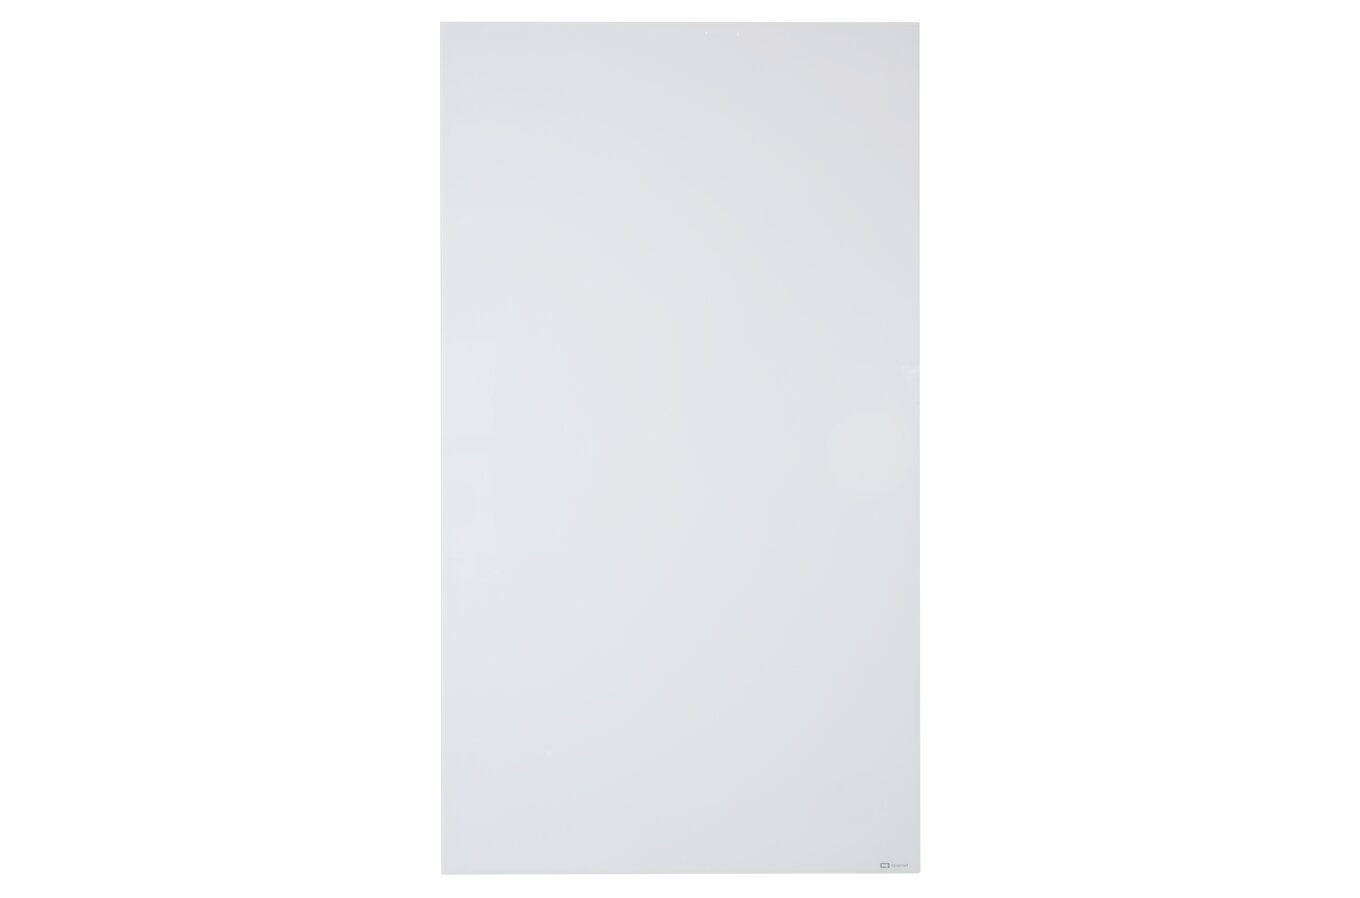 Buy Post It® Dry Erase Surface Table Top Easel Pad, 20 x 23 at